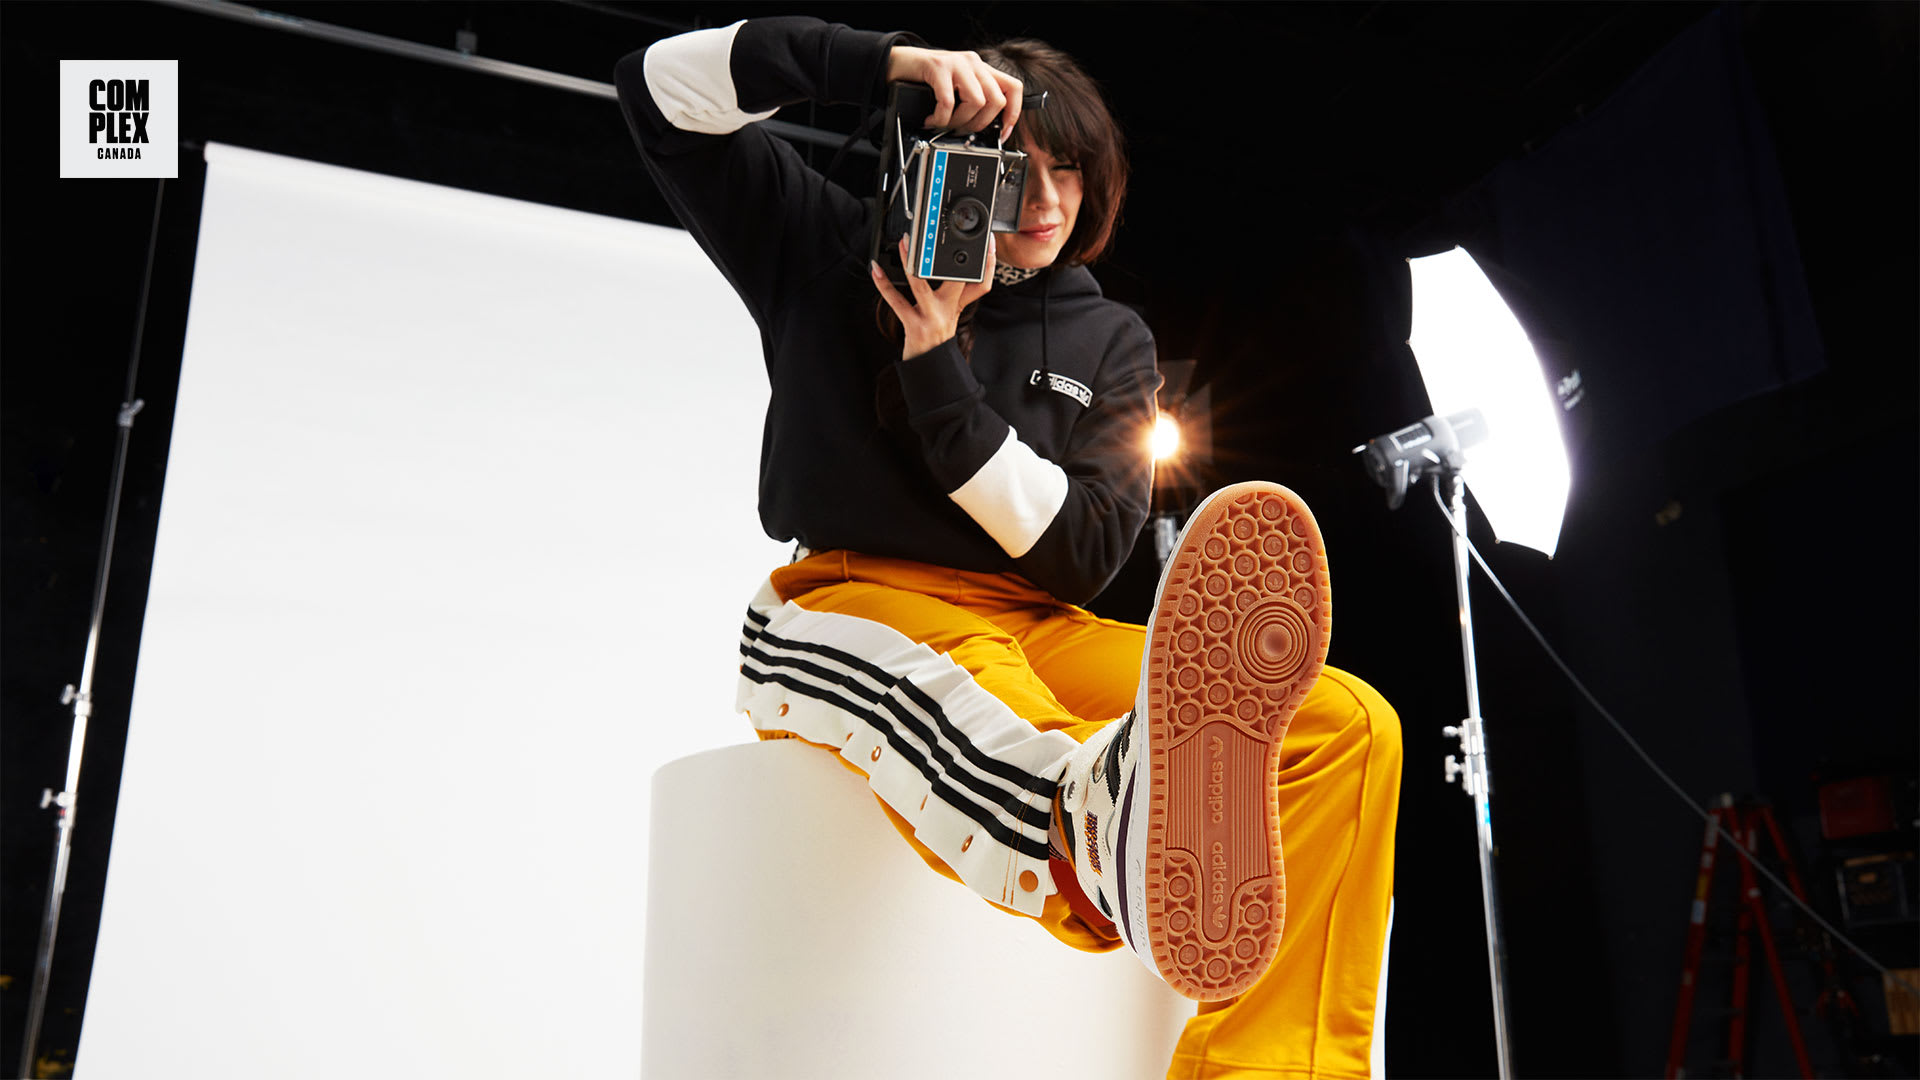 Briony poses with camera rocking adidas Girls Are Awesome collection